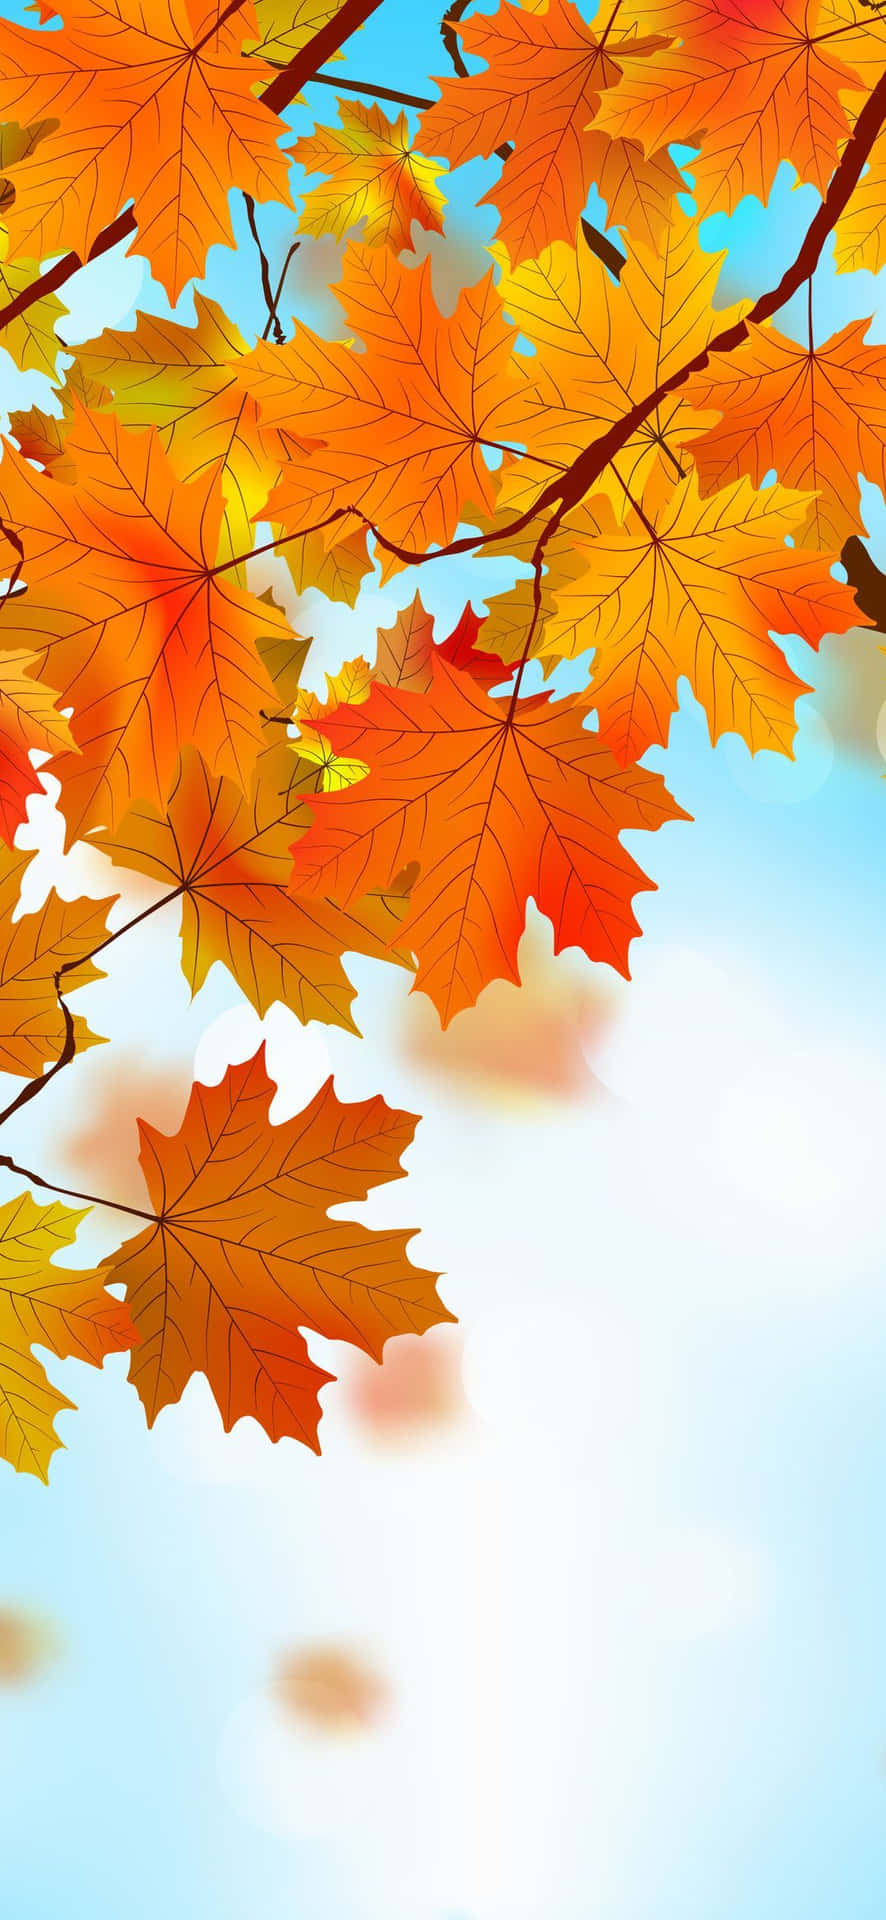 Autumn Leaves On A Branch With Blue Sky Wallpaper